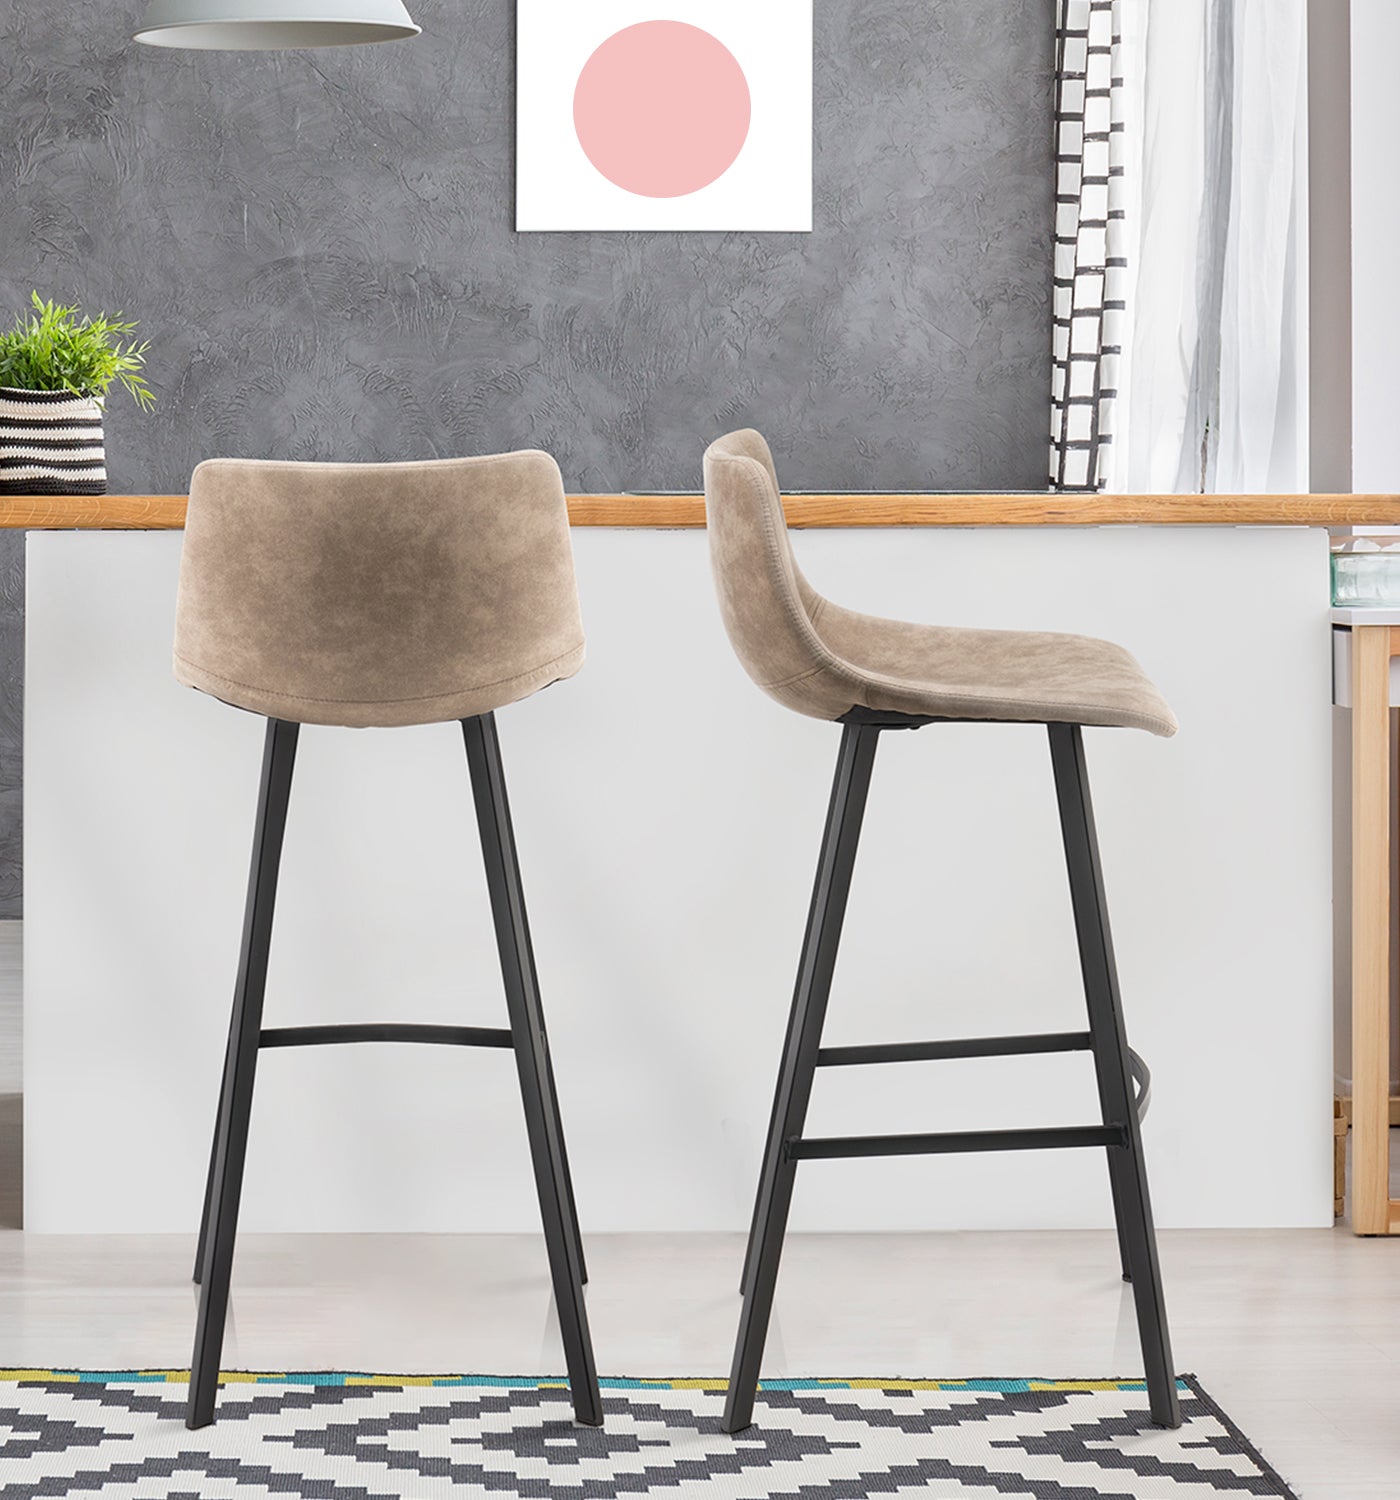 NOVIGO Urban Industrial Bar Stool 38 Inches with Backrest and Footrest for Cafes Height Stools, Vintage Pub Bars,Living Room,Kitchen,Set of 2,Geometric Design Bottom Support